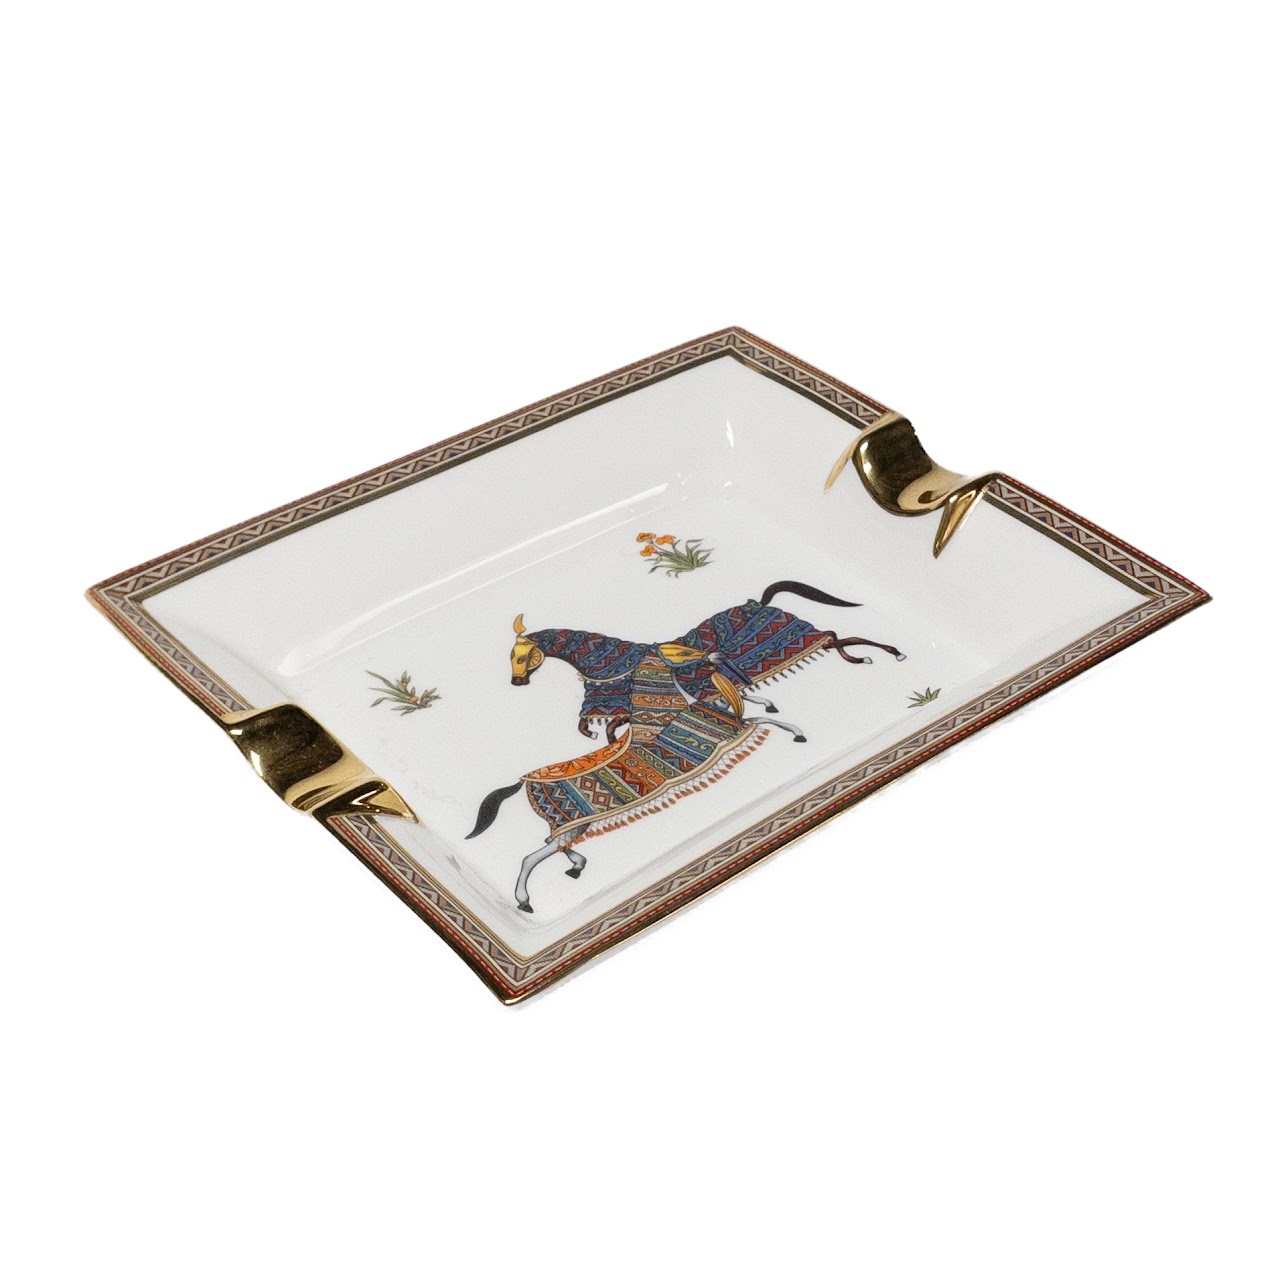 Sold at Auction: AN HERMES CIGAR ASHTRAY